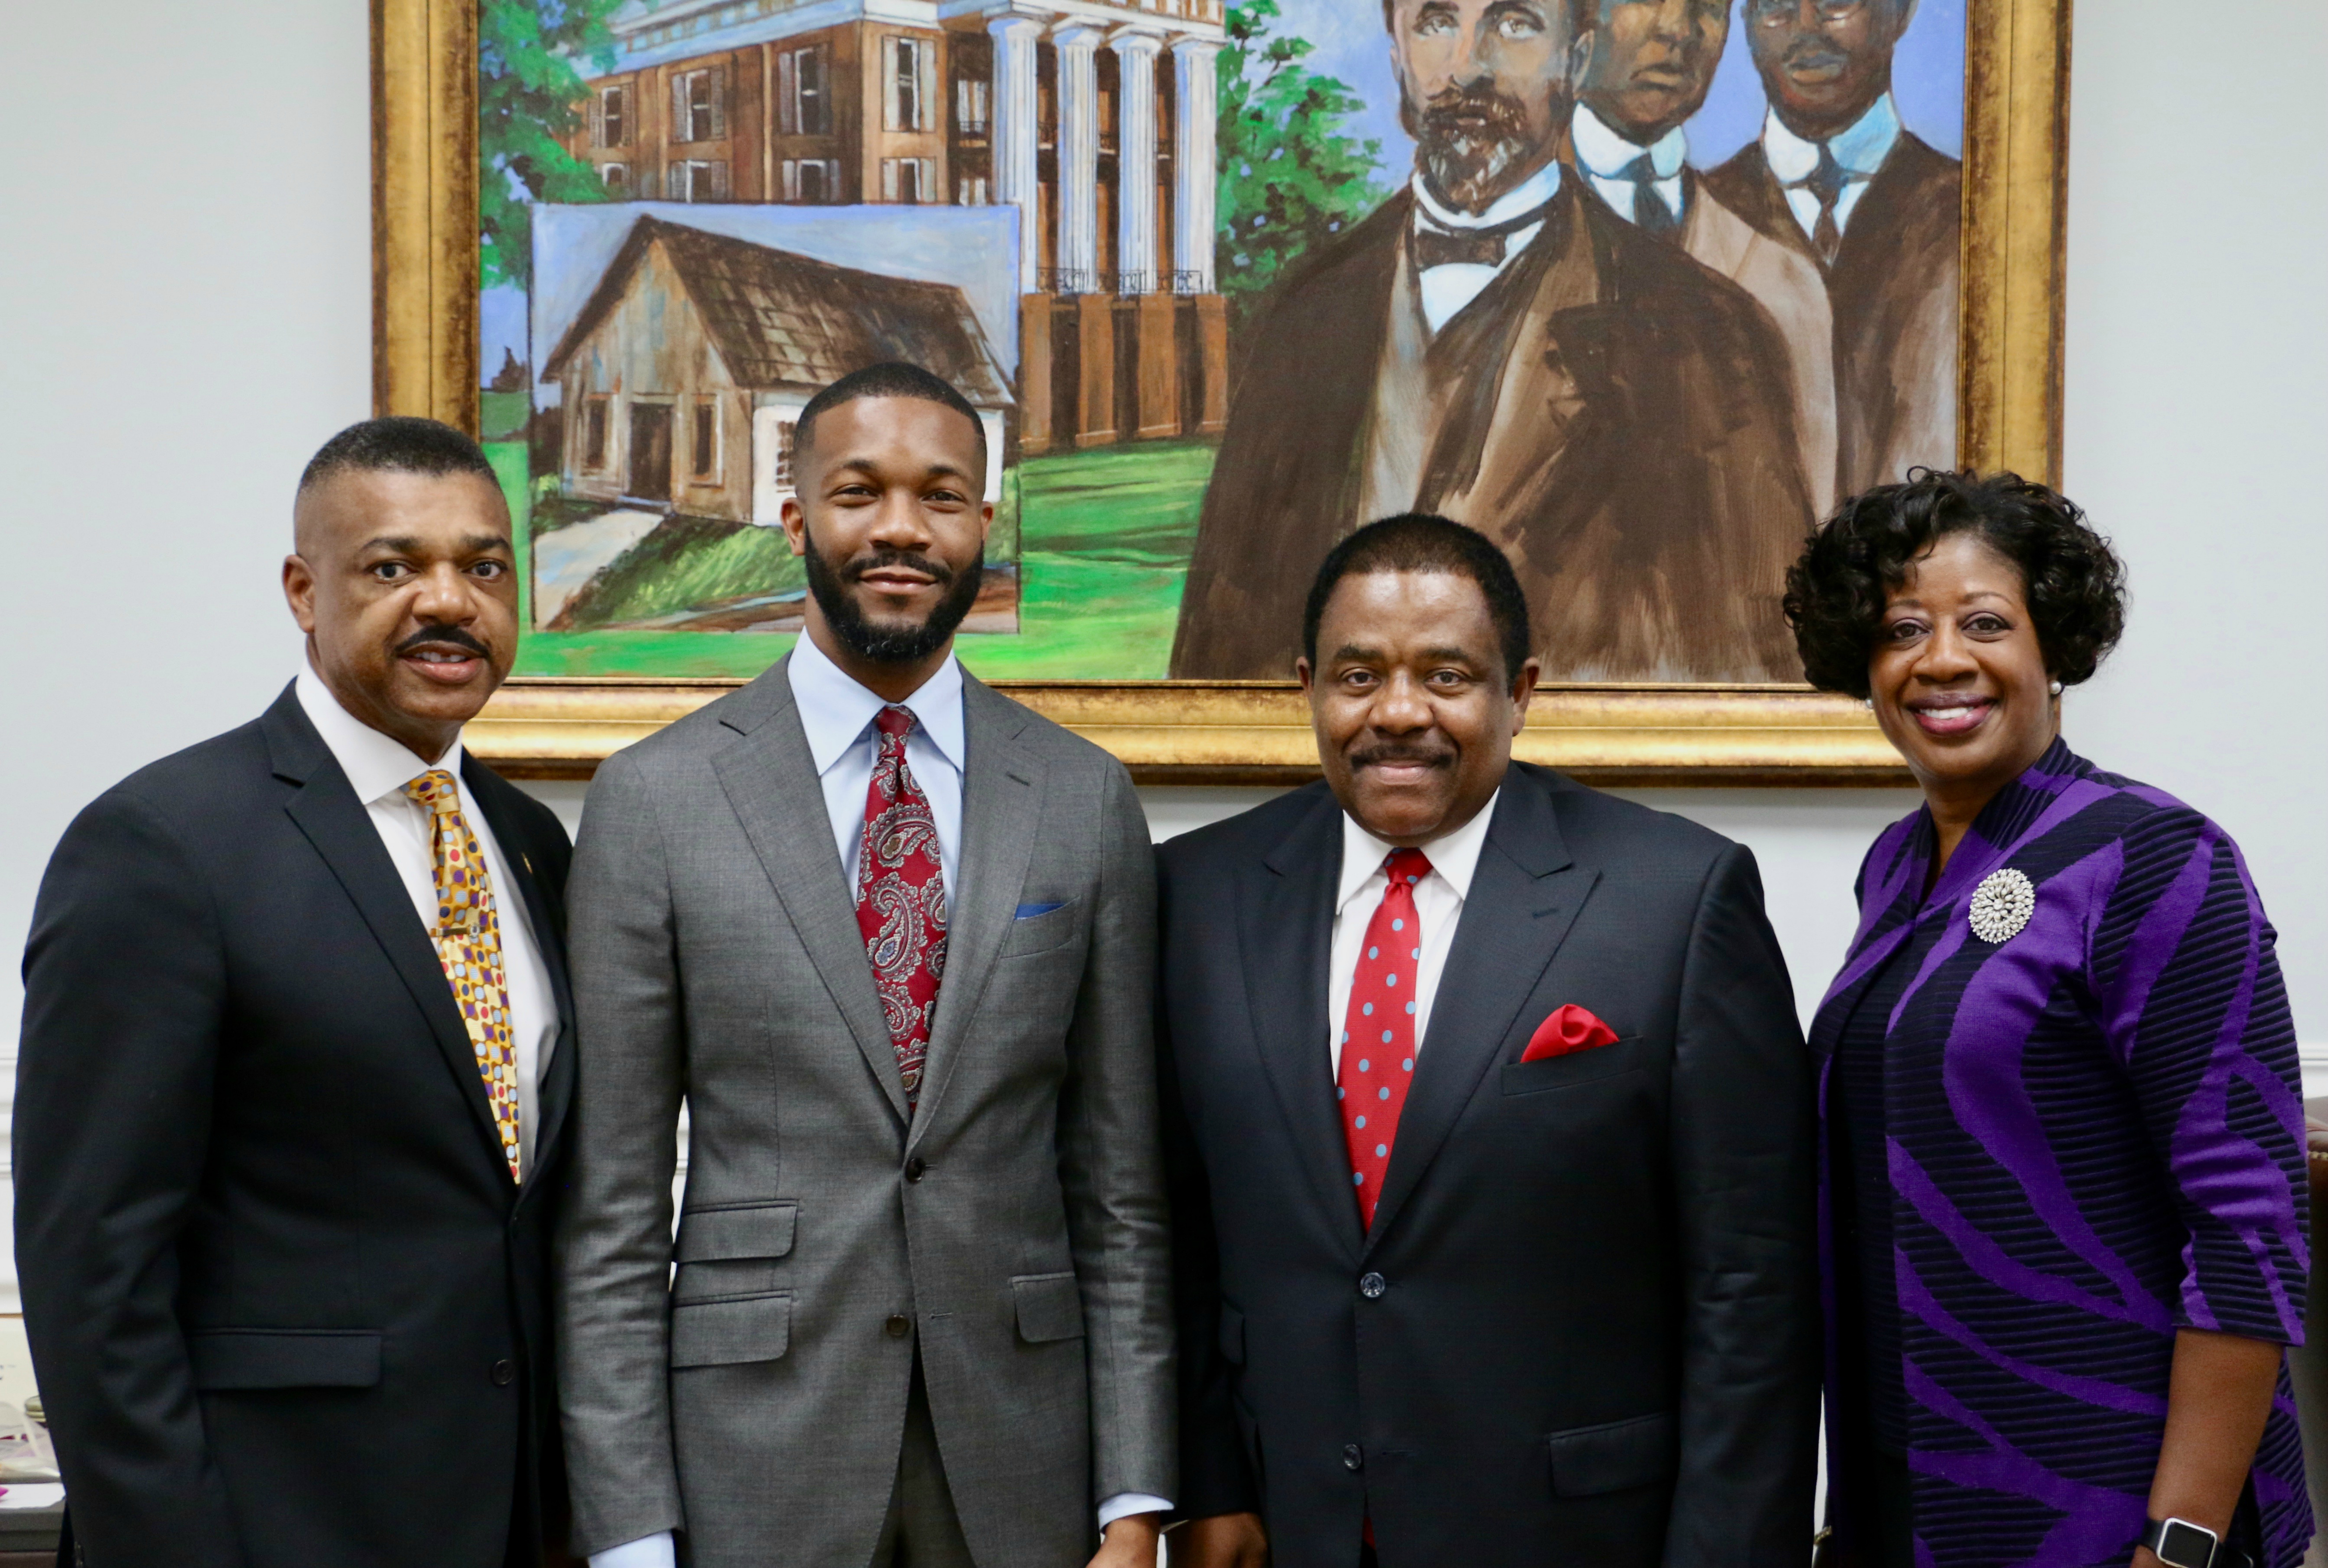  Annual Martin Luther King Jr./Black History Month Convocation at Talladega College